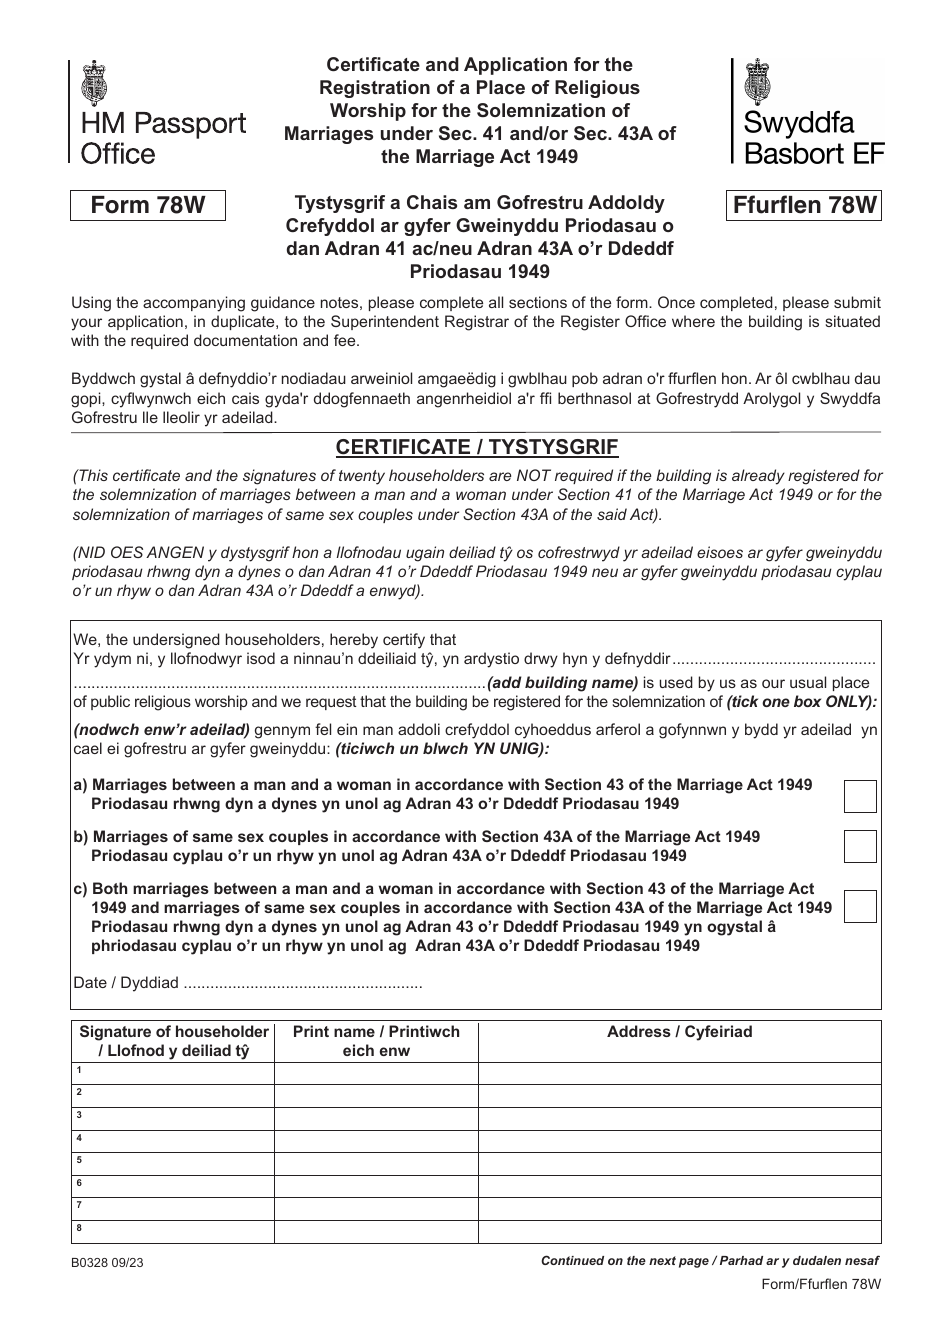 Form 78W Certificate and Application for the Registration of a Place of Religious Worship for the Solemnization of Marriages Under SEC. 41 and / or SEC. 43a of the Marriage Act 1949 - United Kingdom (English / Welsh), Page 1